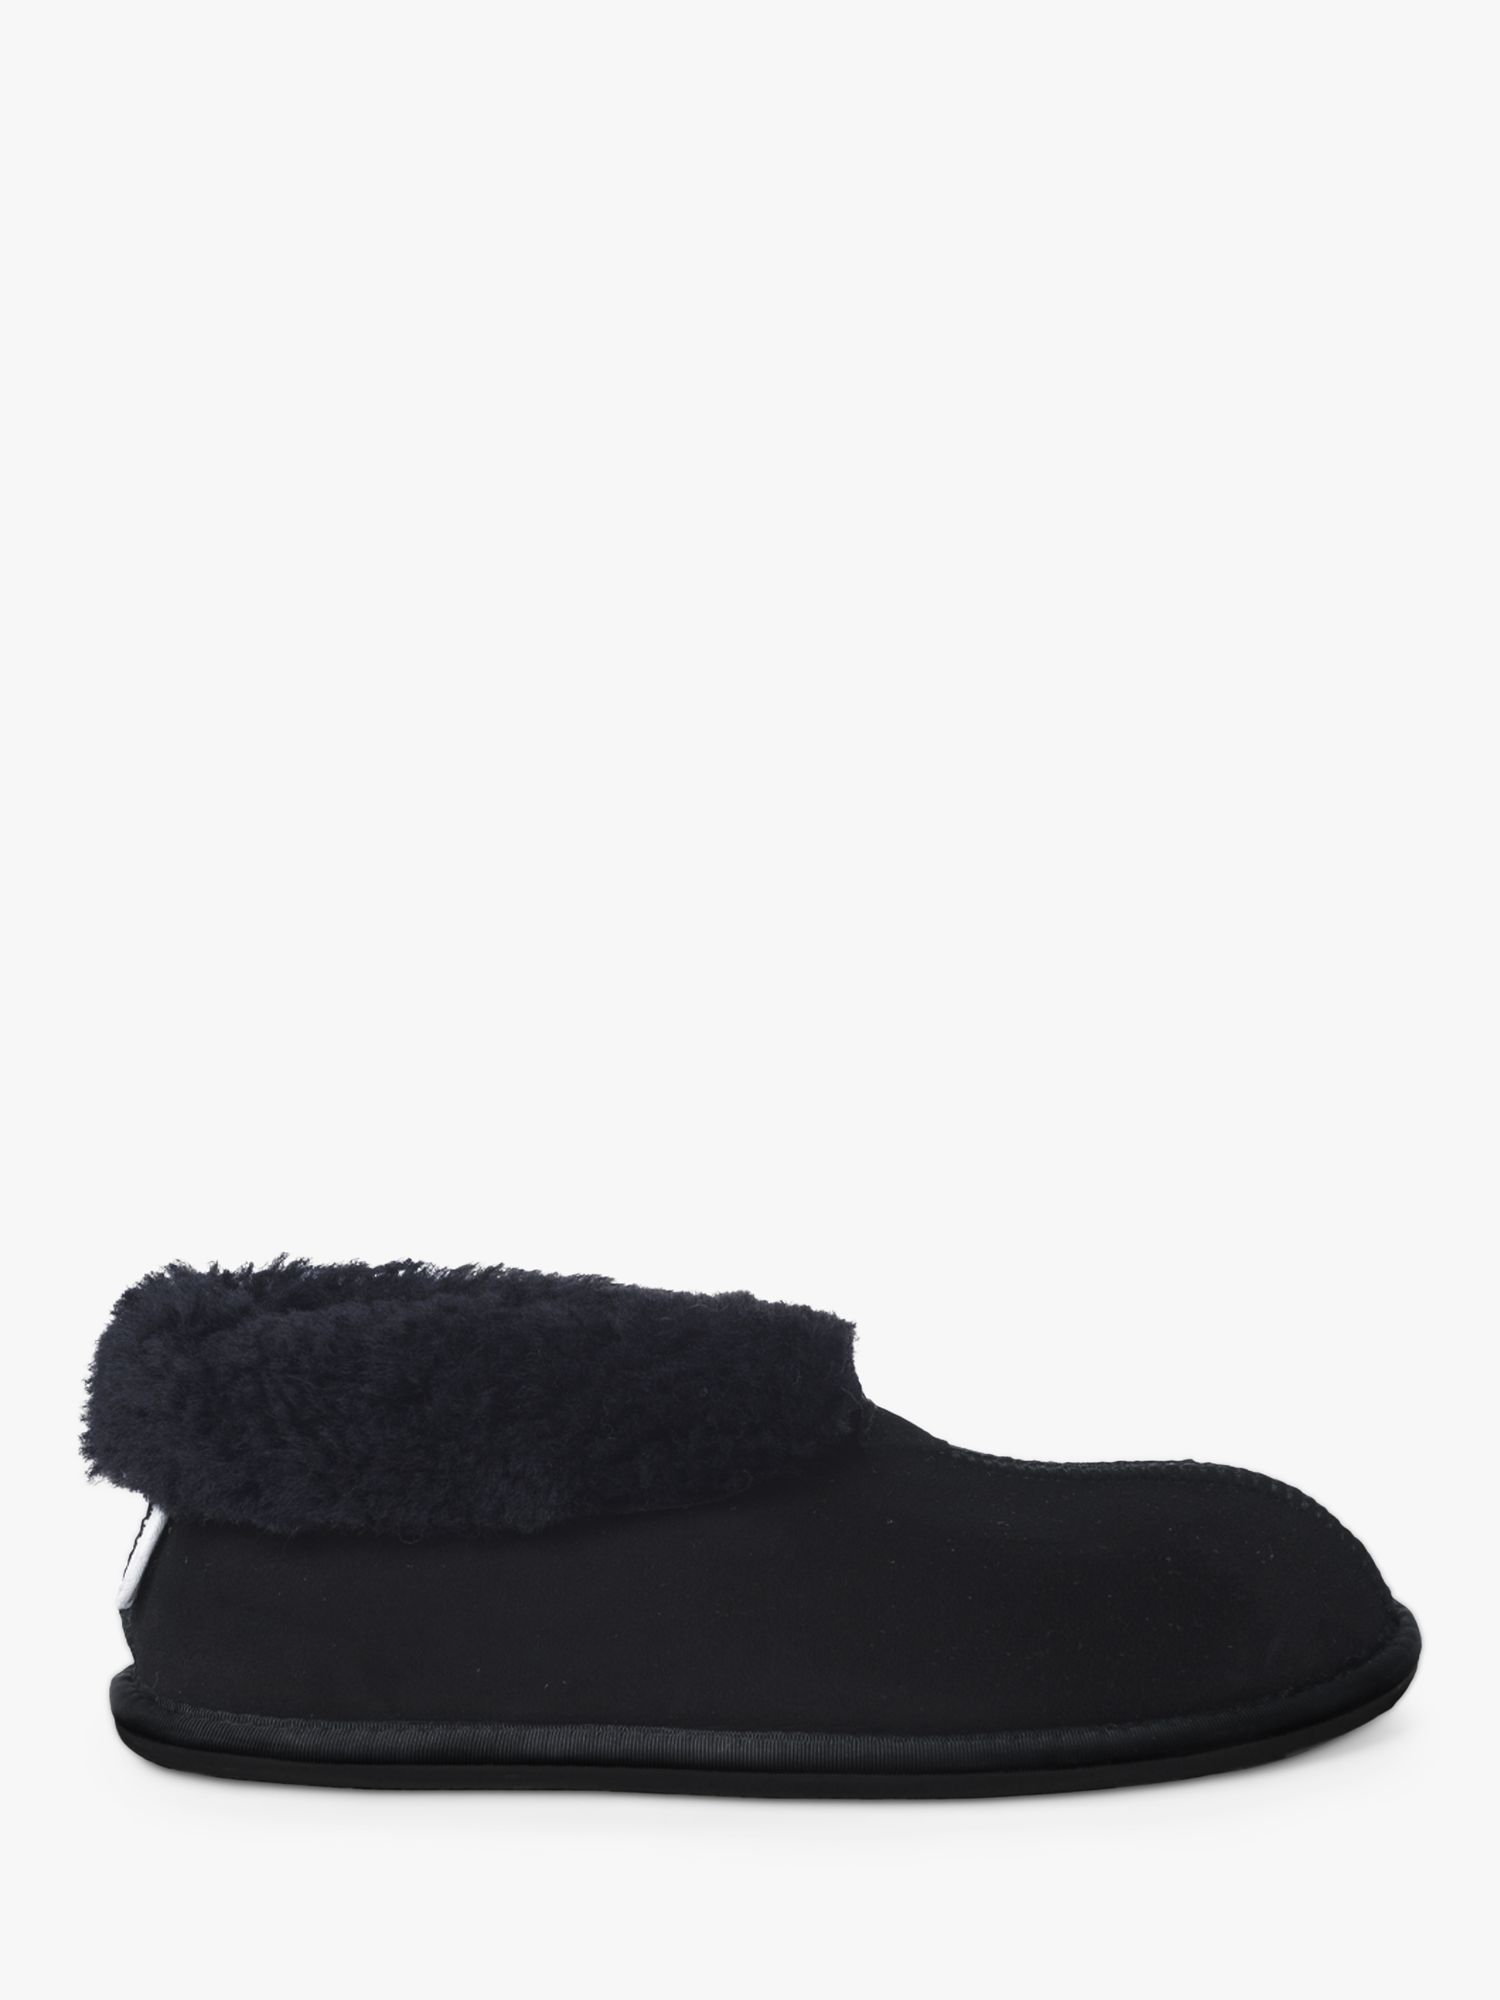 Celtic & Co. Men's Sheepskin Bootee Slippers, Navy at John Lewis & Partners